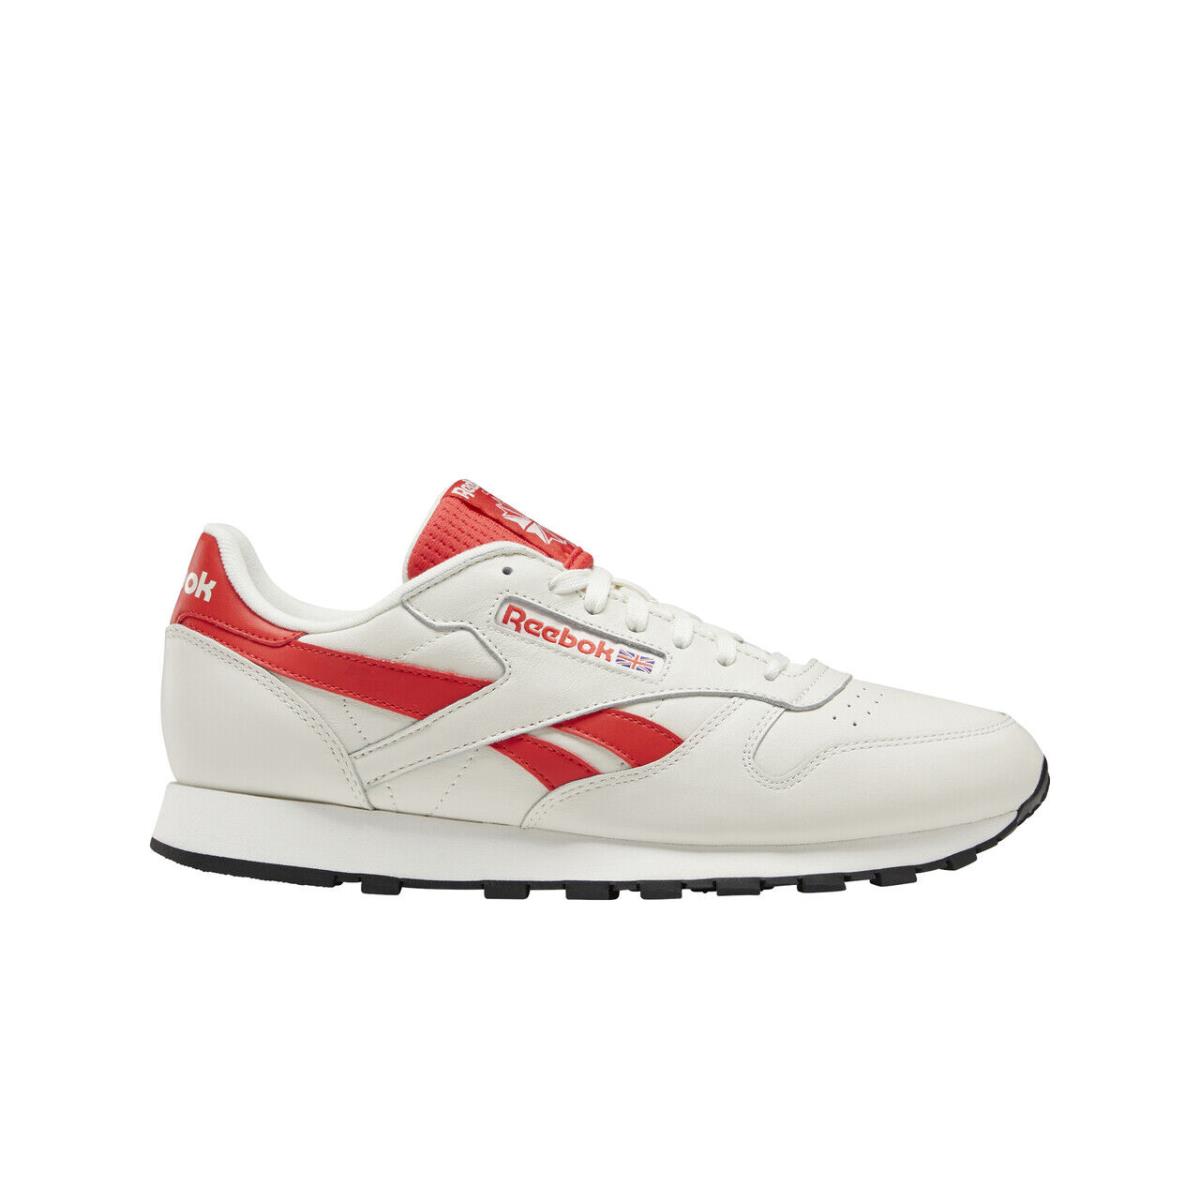 Reebok shoes Classic Leather - Chalk/Rad Red 1